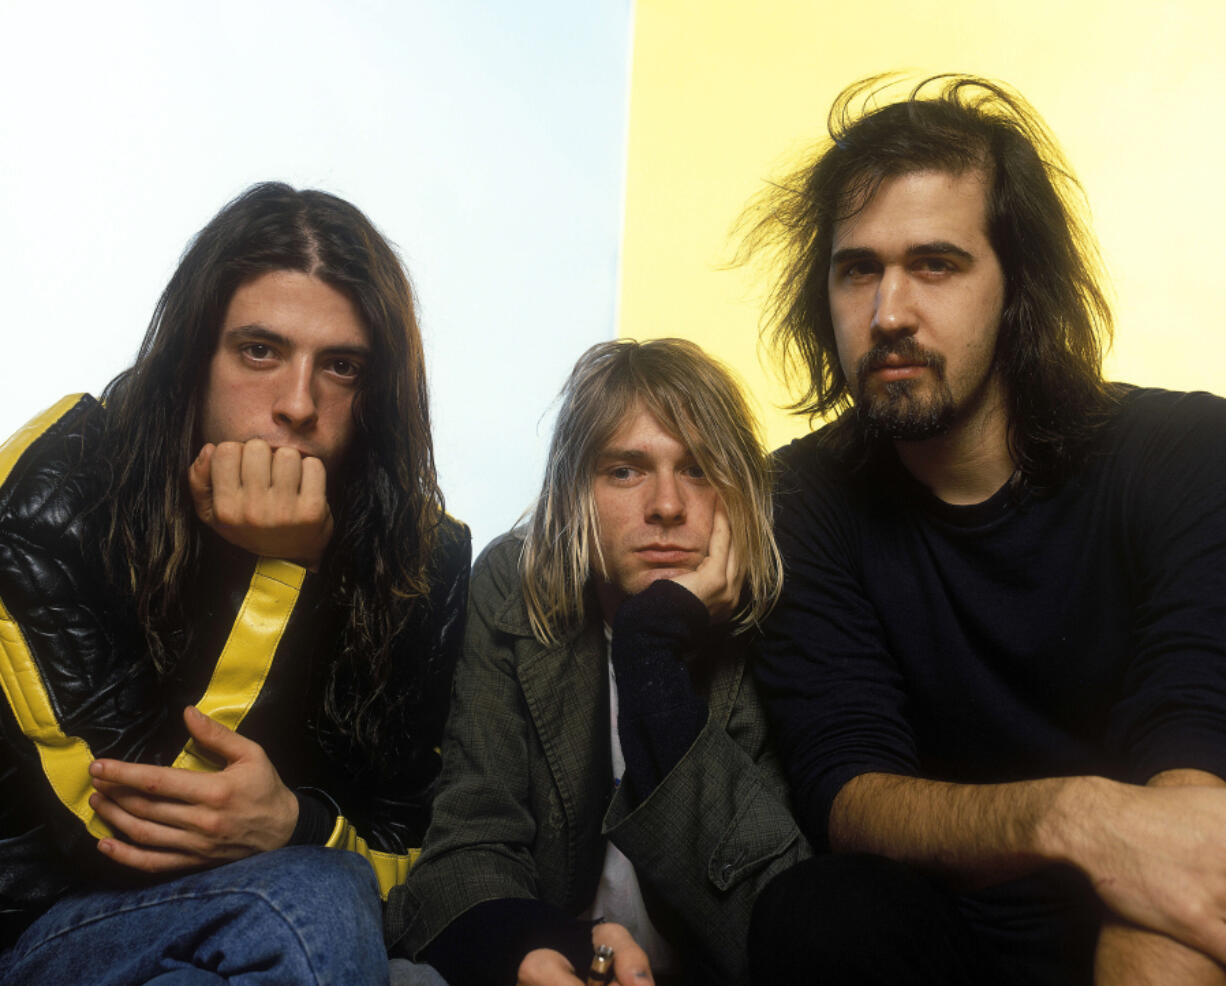 From left, Dave Grohl, Kurt Cobain and Krist Novoselic of Nirvana in London, circa 1992.